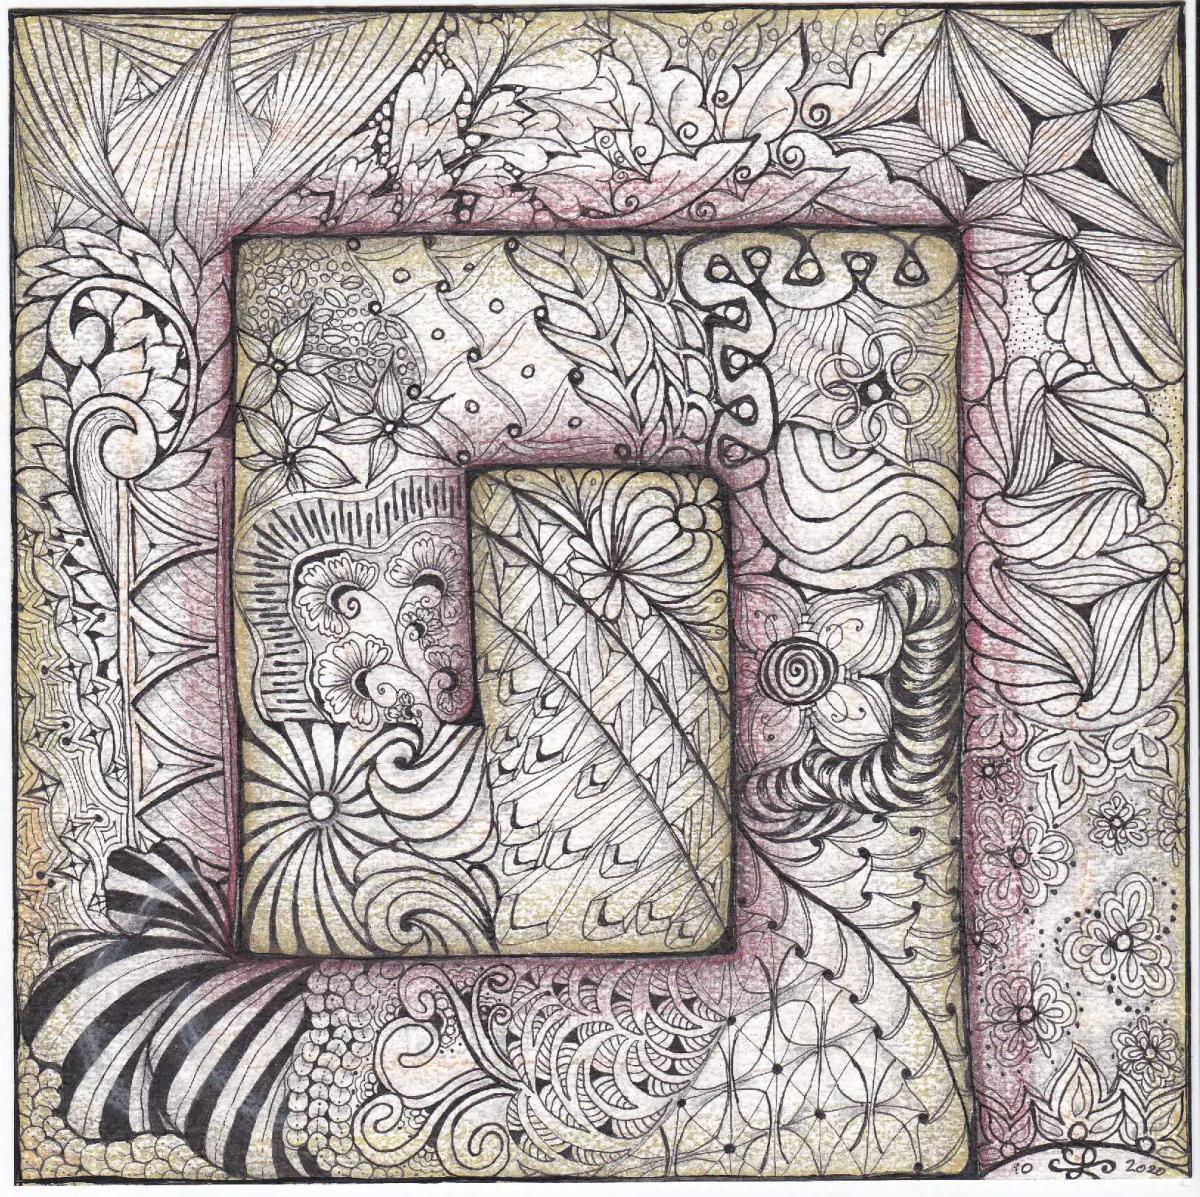 Zentangle Gallery & Two Gray Hares Disk Golf Course